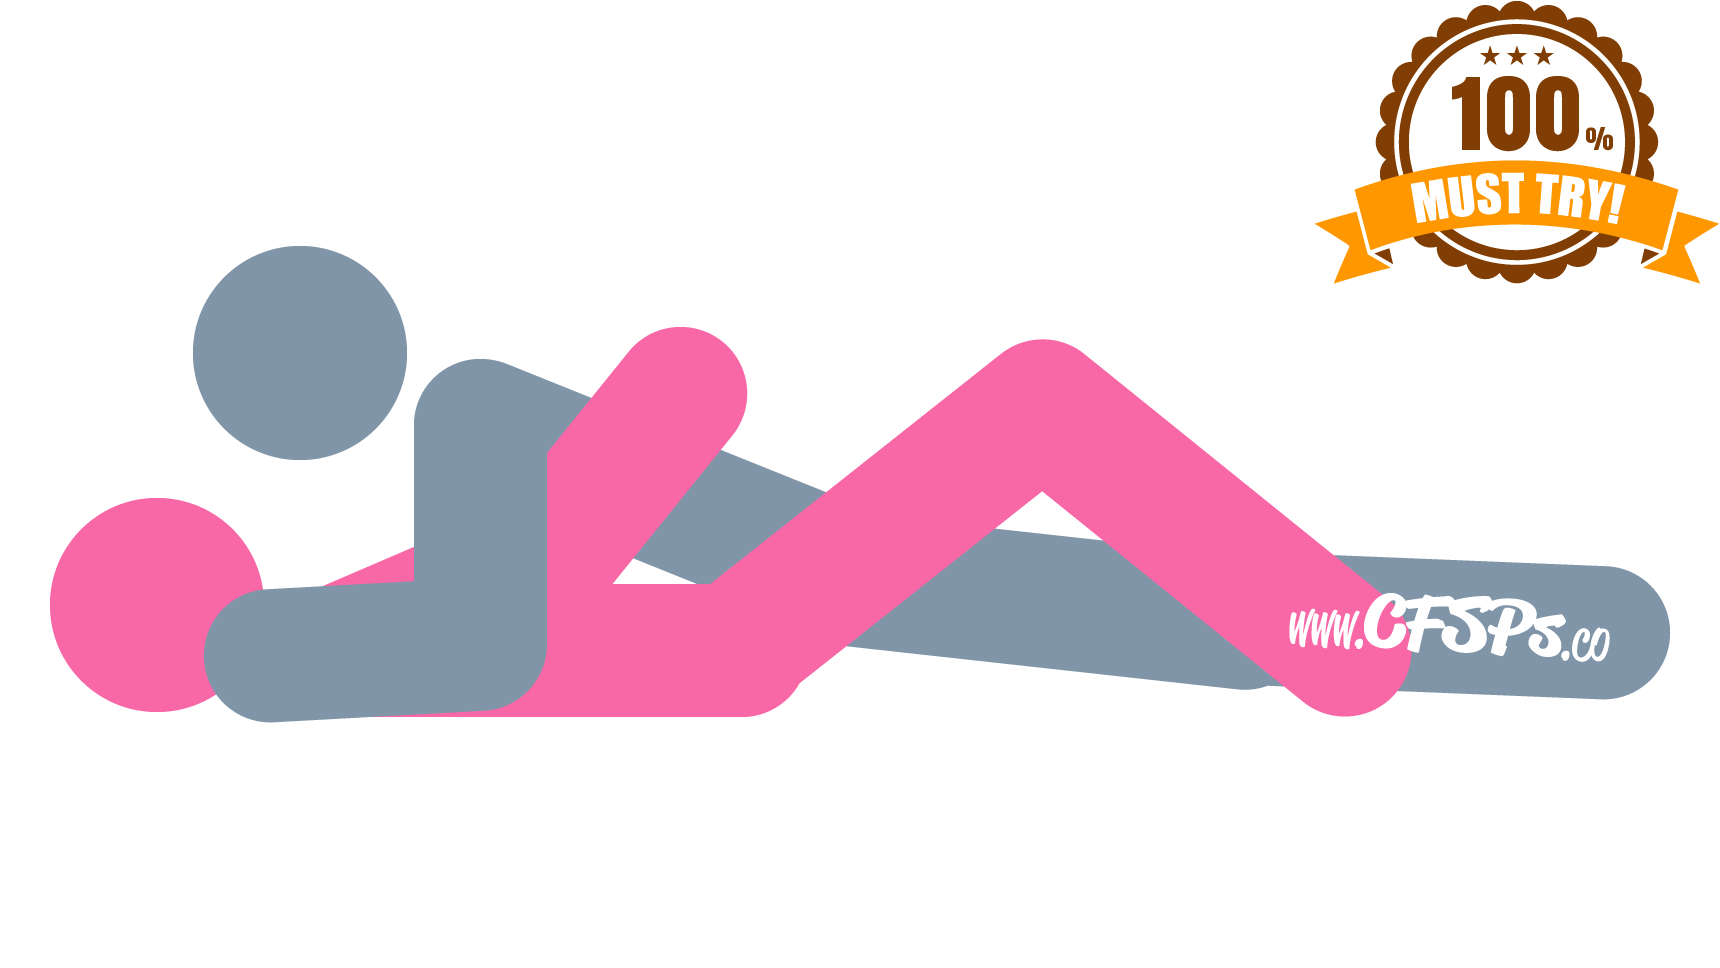 An illustration of the Missionary sex position. This picture demonstrates how Missionary is an intimate, man-on-top sex position with deep penetration.